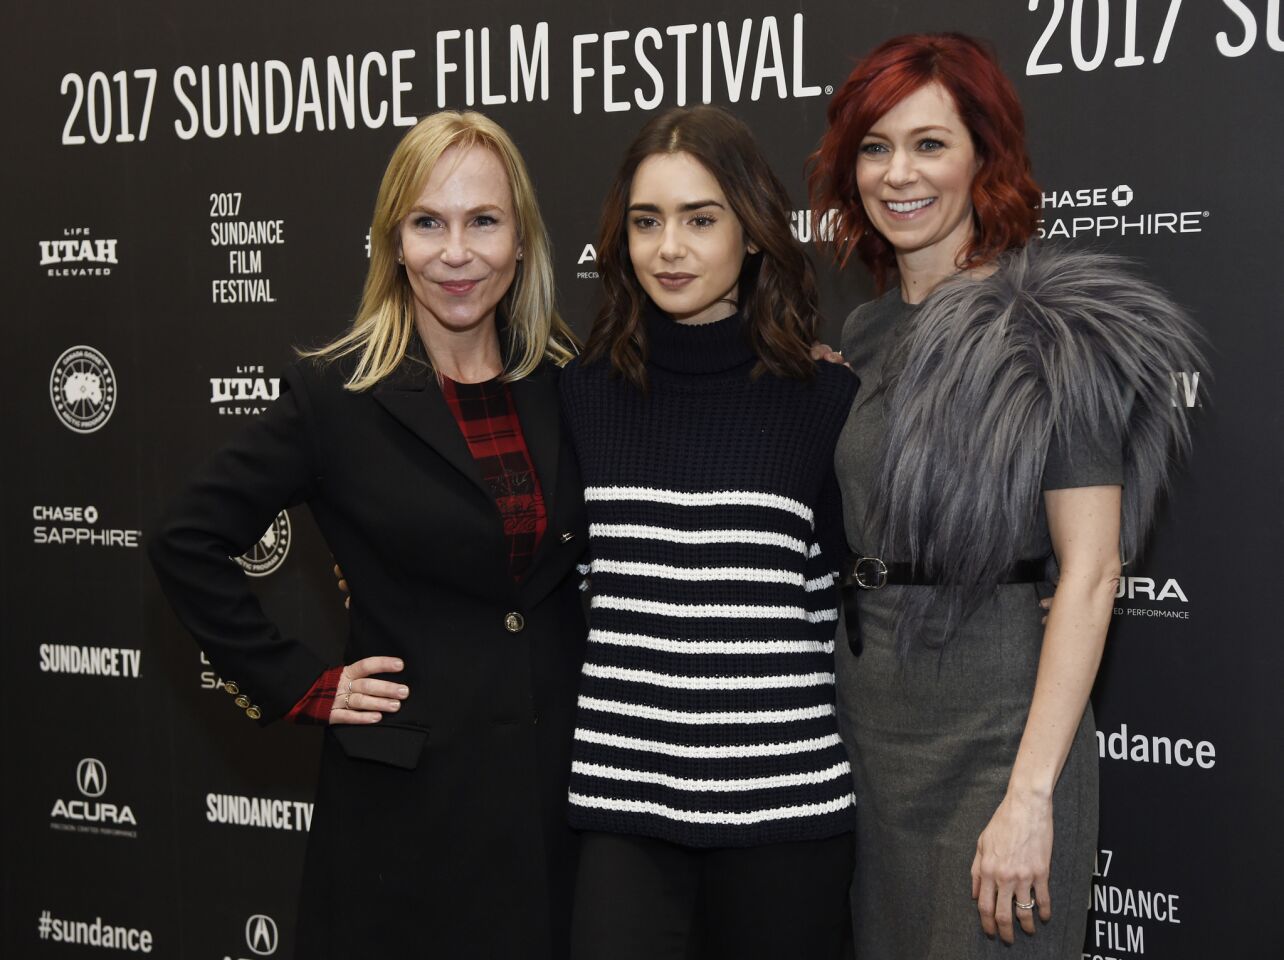 Marti Noxon, left, writer and director of "To the Bone," poses with cast members Lily Collins, center, and Carrie Preston at the Jan. 22 premiere of the film in Park City Utah, during the 2017 Sundance Film Festival.